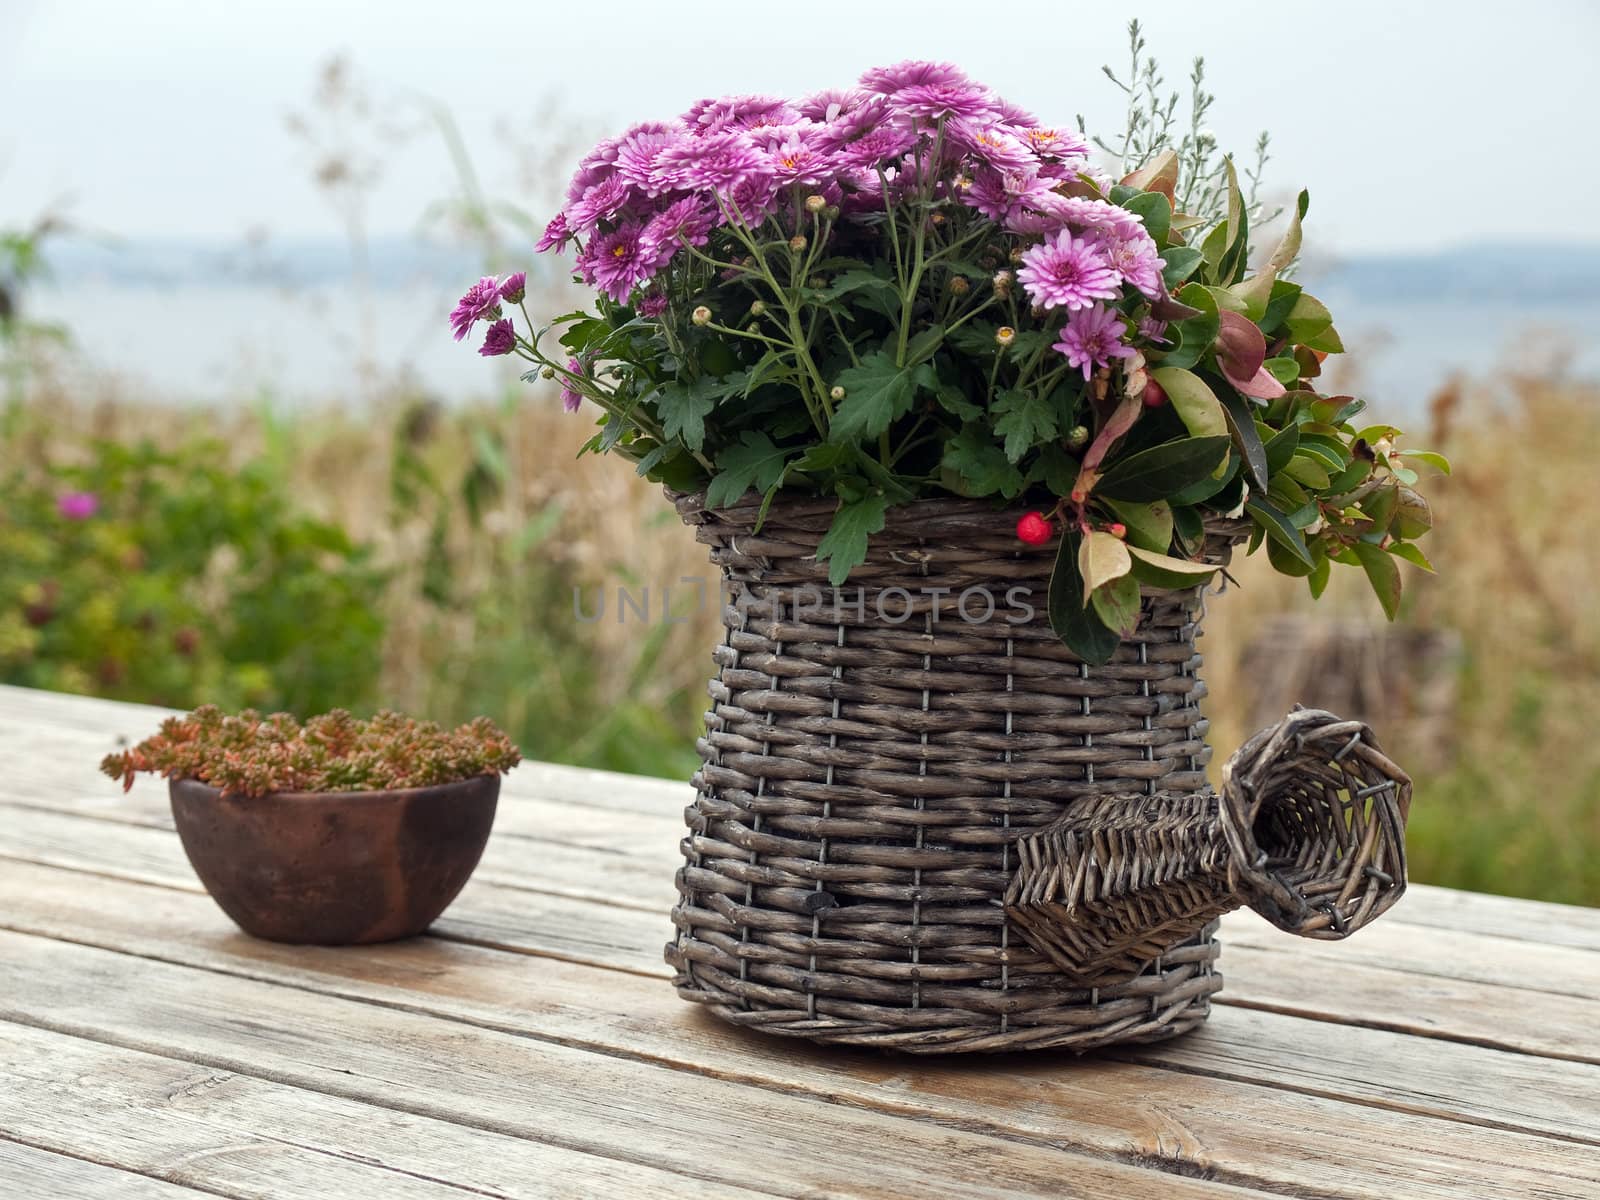 Beautiful still life basket of flowers on a wooden table 